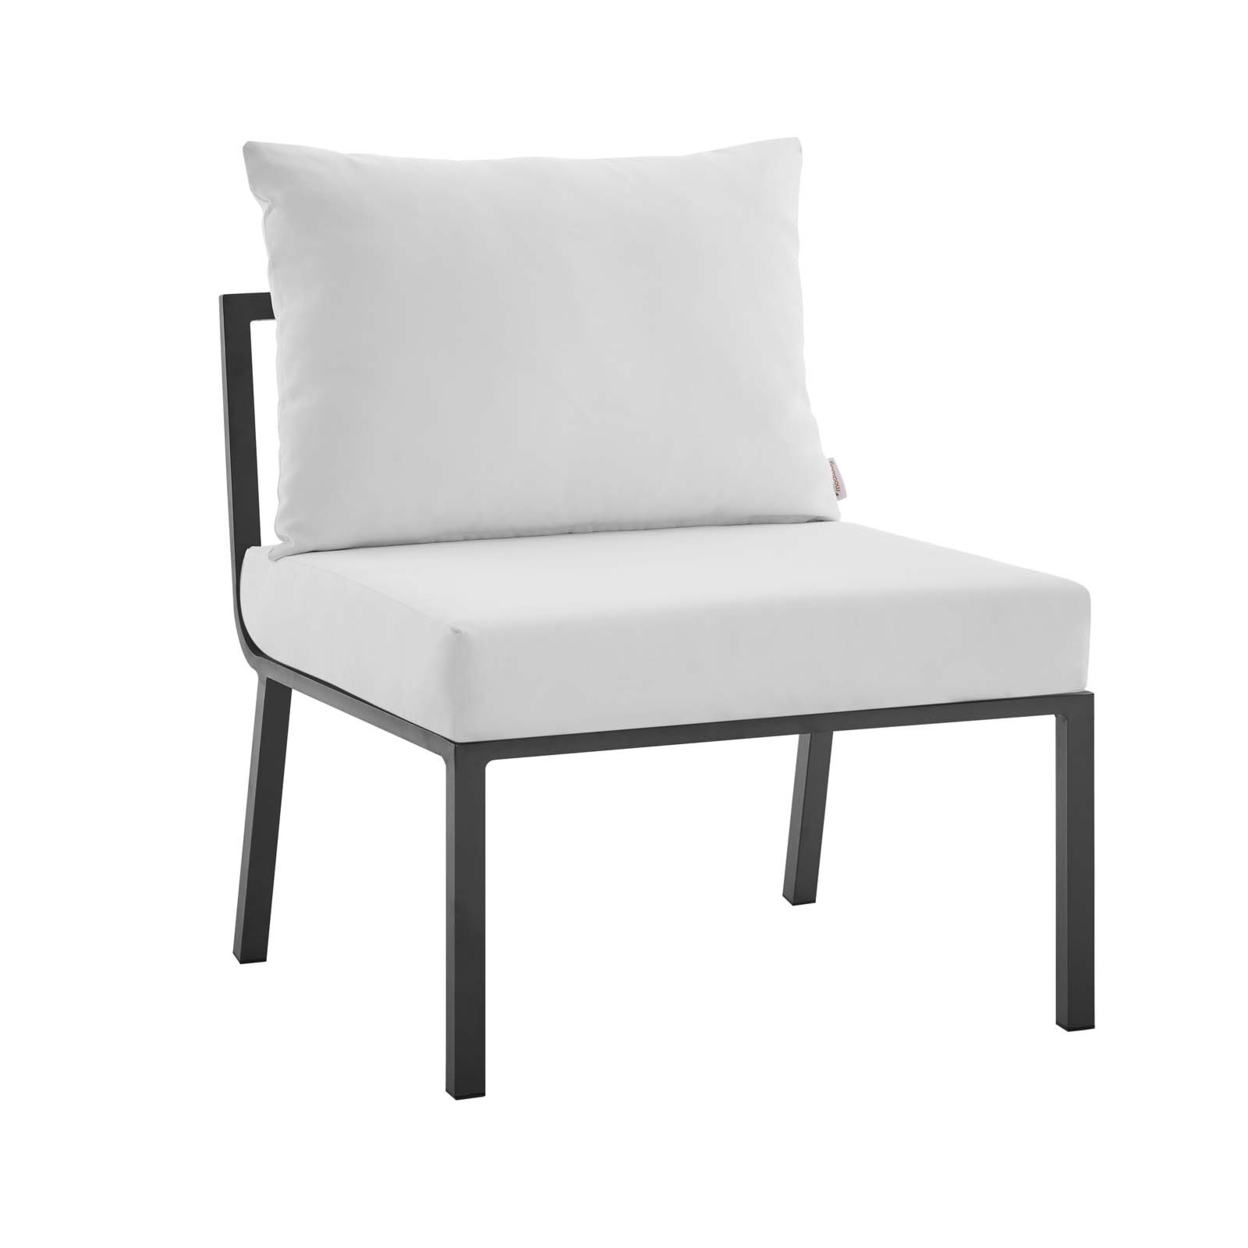 Riverside Outdoor Patio Aluminum Armless Chair,Gray White